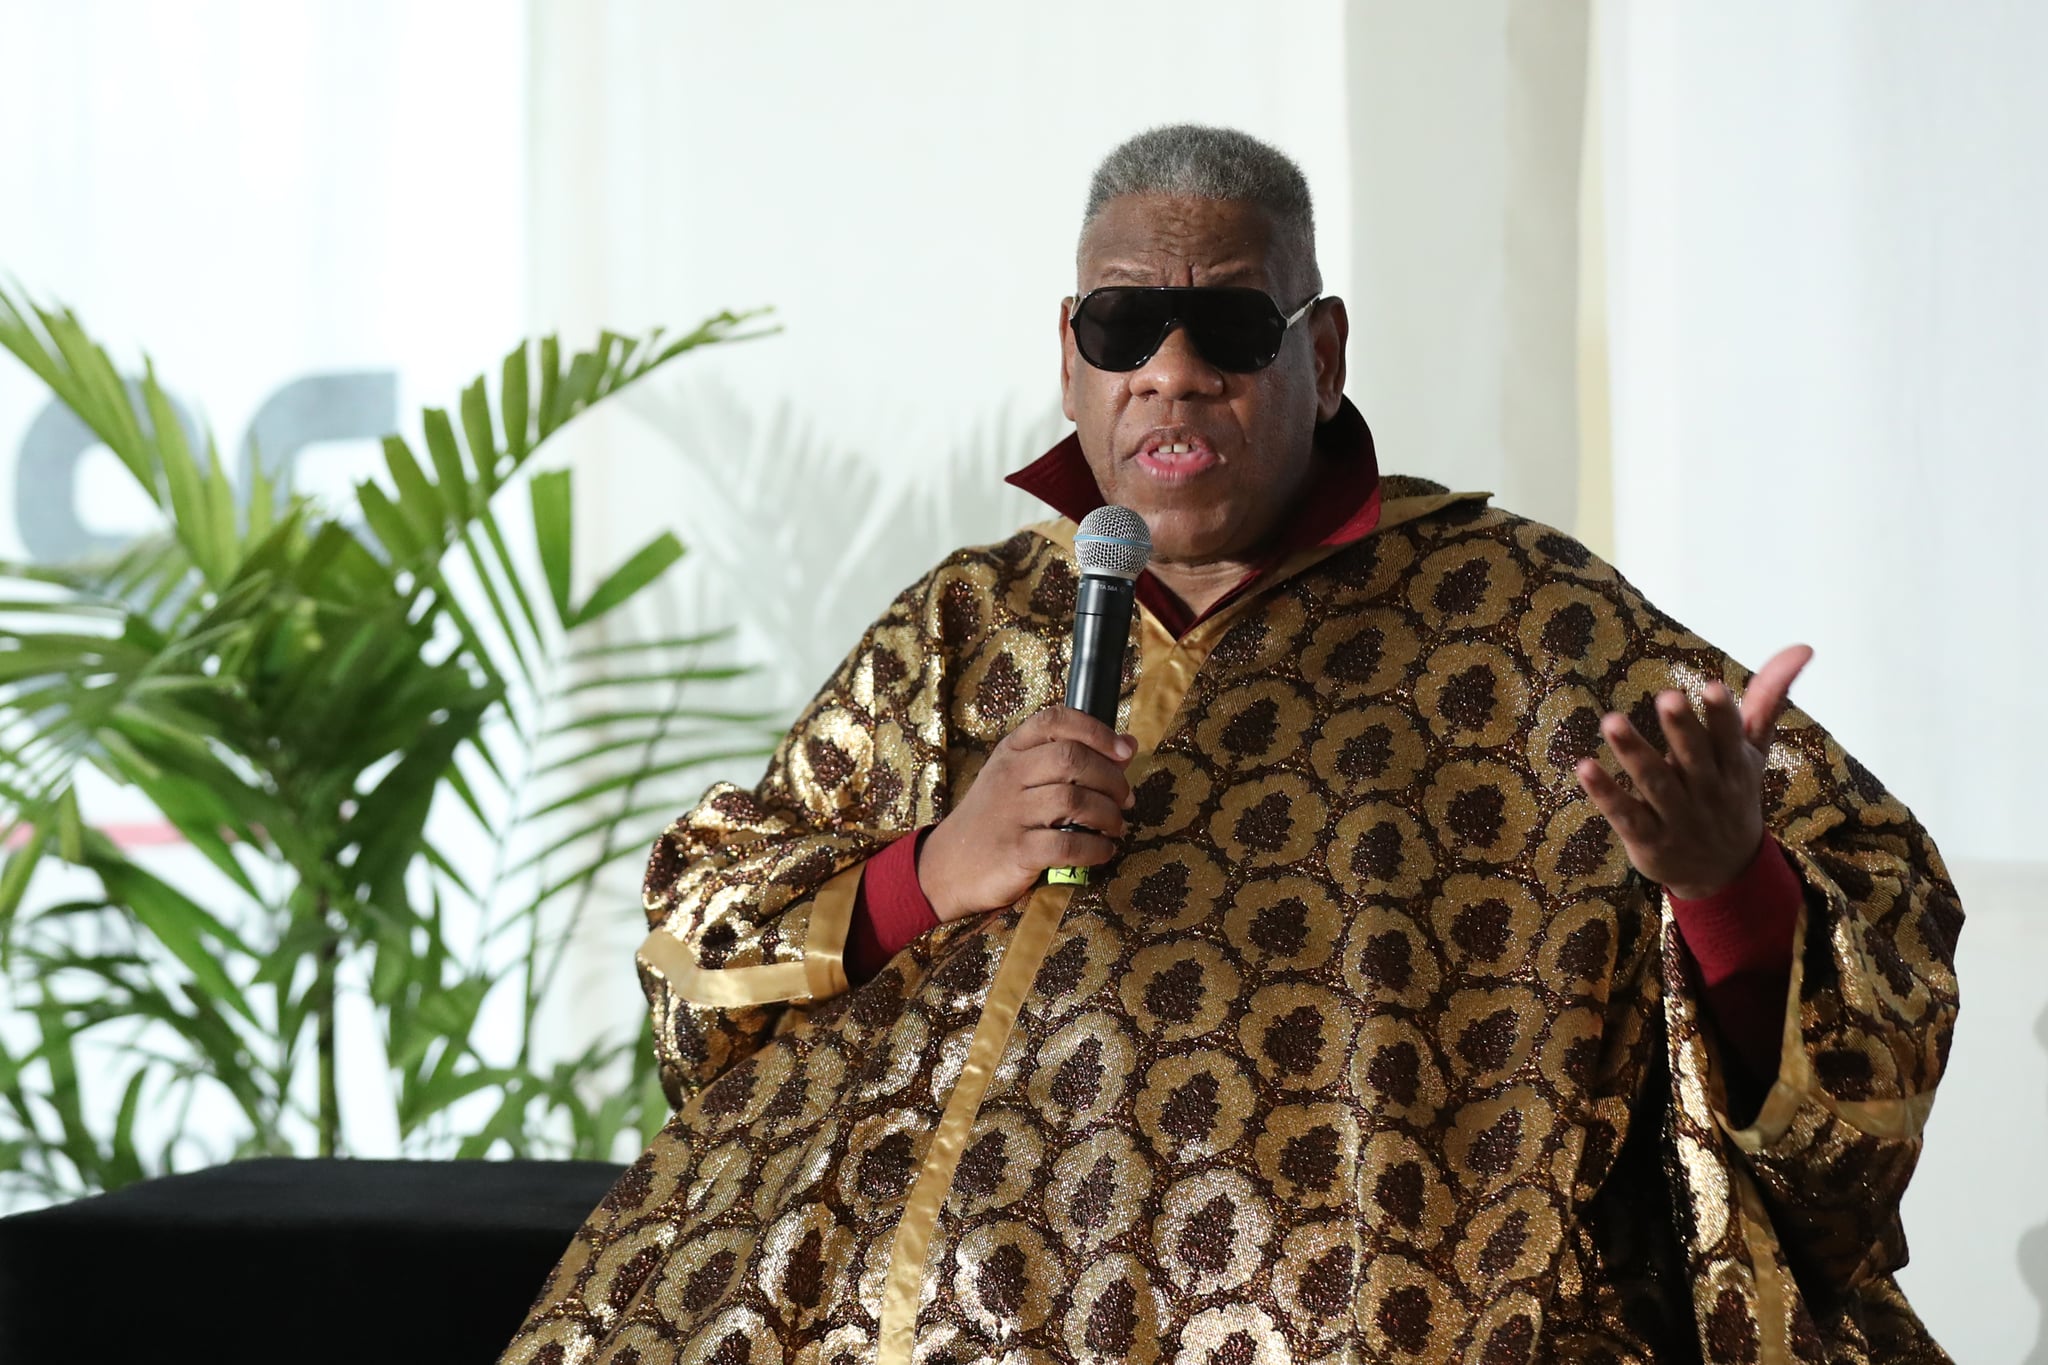 LAGOS, NIGERIA - APRIL 20:Fashion journalist André Leon Talley attends Arise Fashion Week on April 20, 2019 in Lagos, Nigeria. (Photo by Bennett Raglin/Getty Images,)